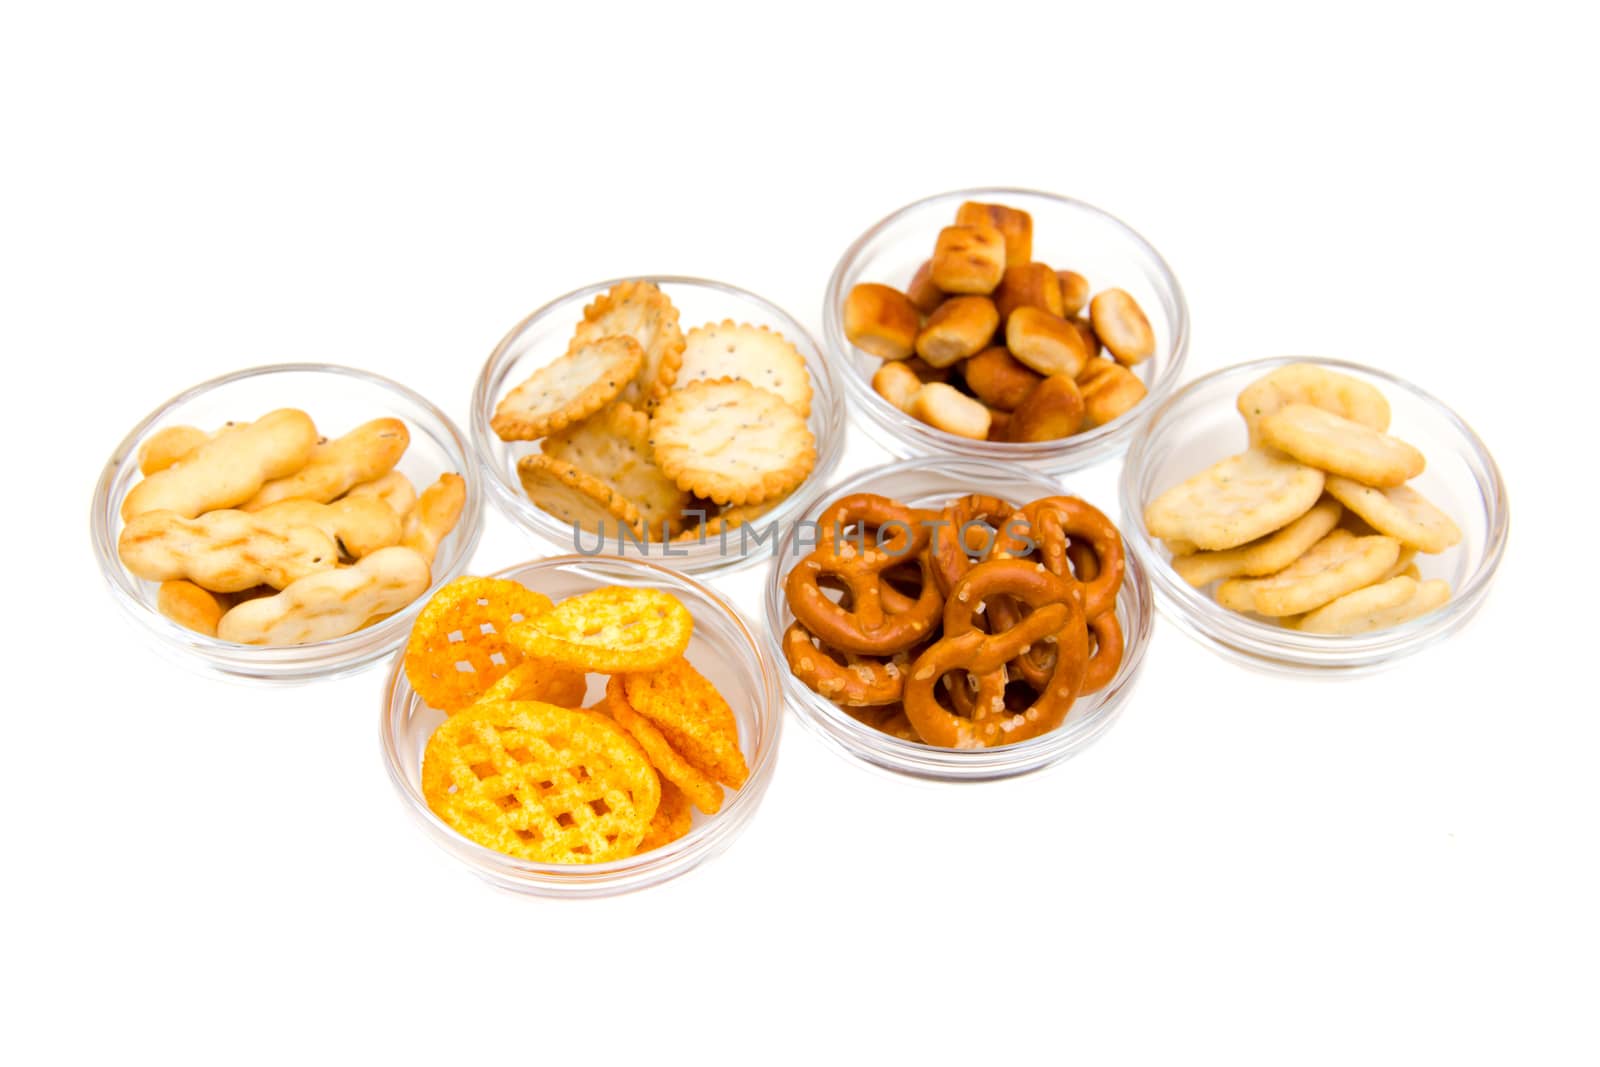 Bowls of pretzels by spafra